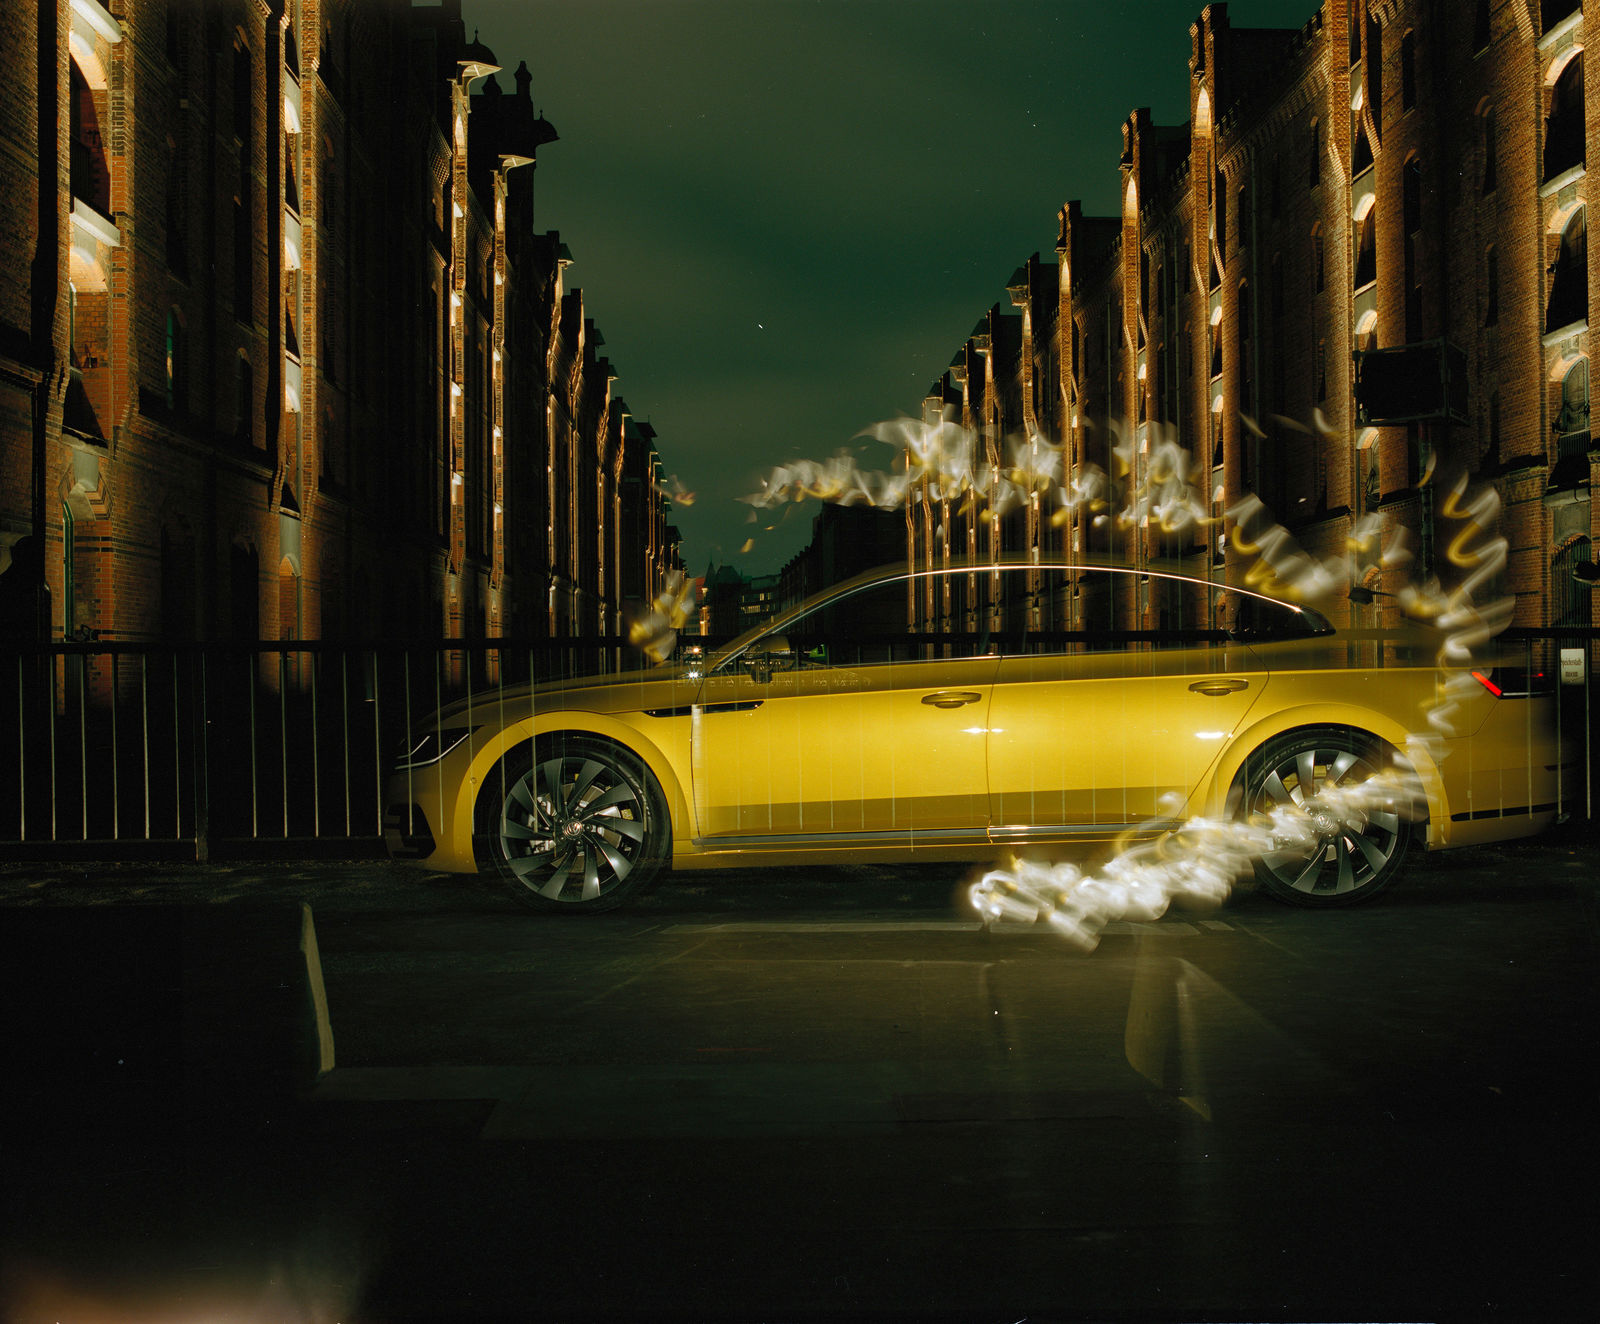 "You don't need eyes to see beauty" – Blind photographer Pete Eckert presents new Volkswagen Arteon with unique images